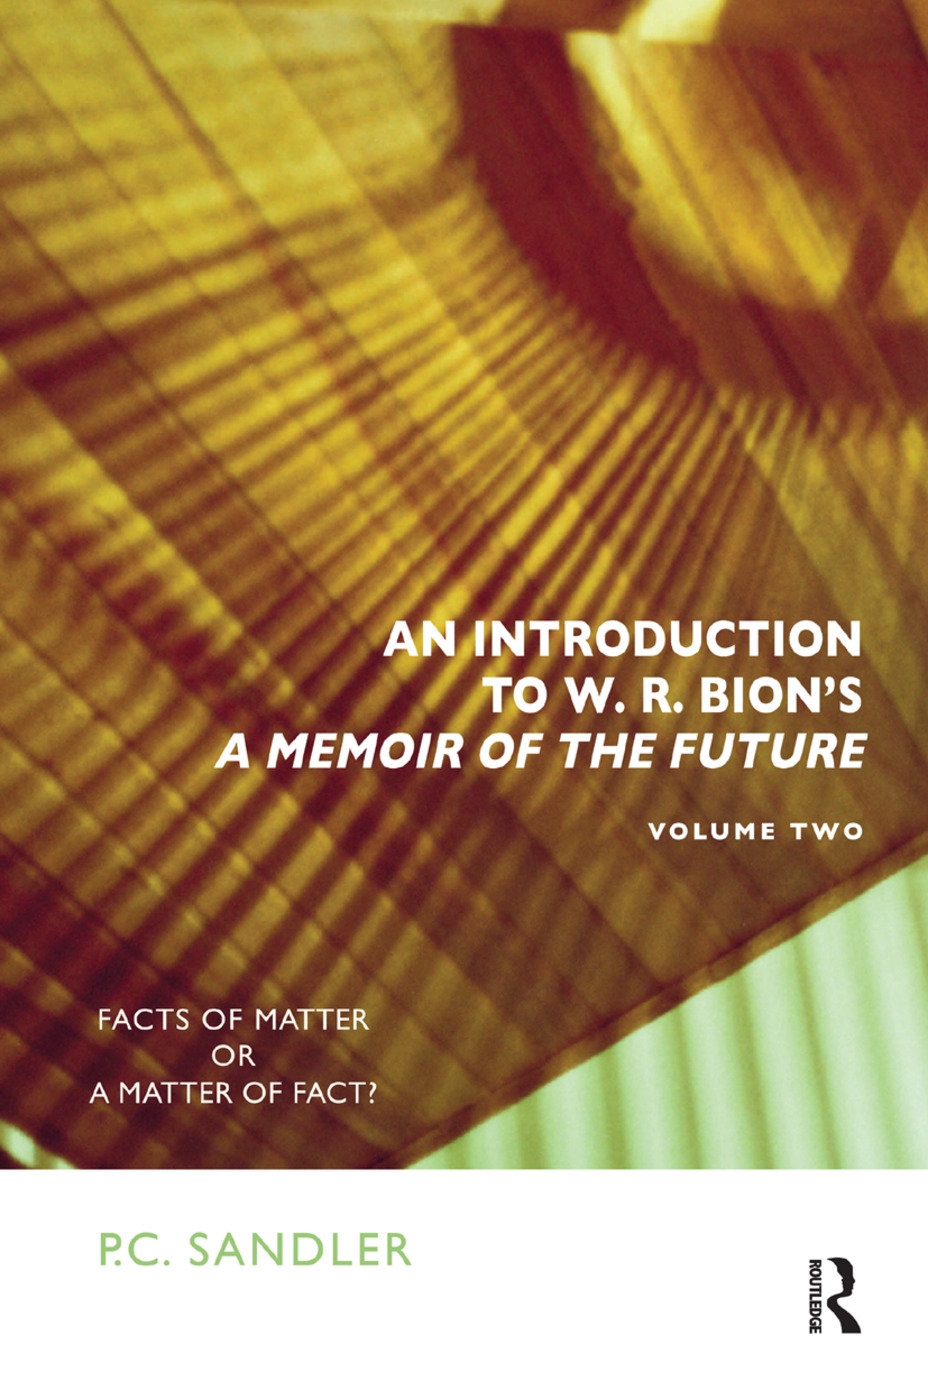 An Introduction to W. R. Bion’s ’A Memoir of the Future’: Facts of Matter or a Matter of Fact?